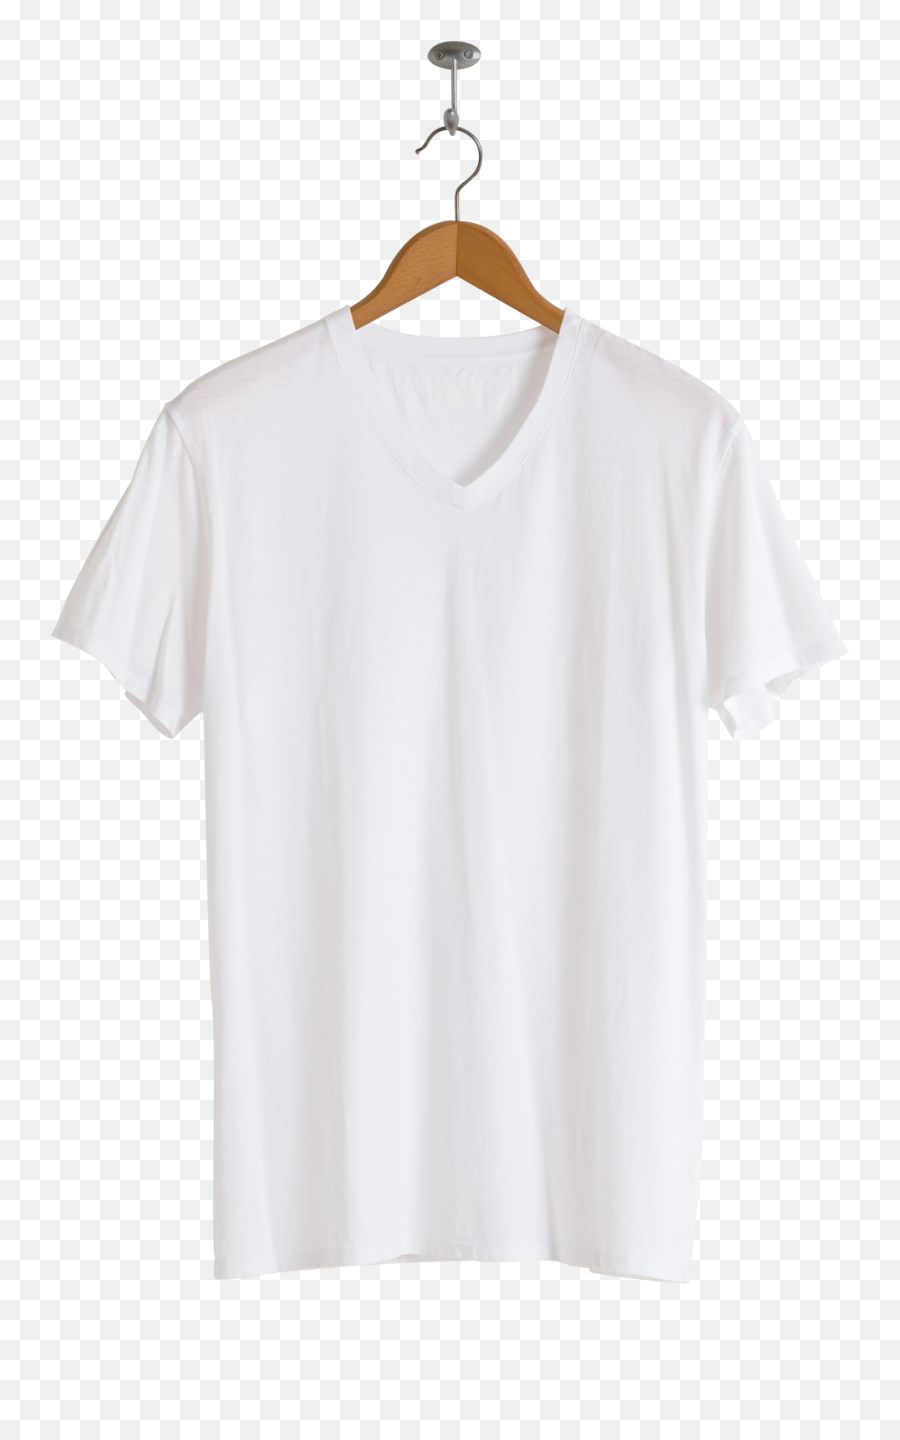 Shirtstops Uk Laundry U0026 Dry Cleaning Service - T Shirt Hanger Png ...